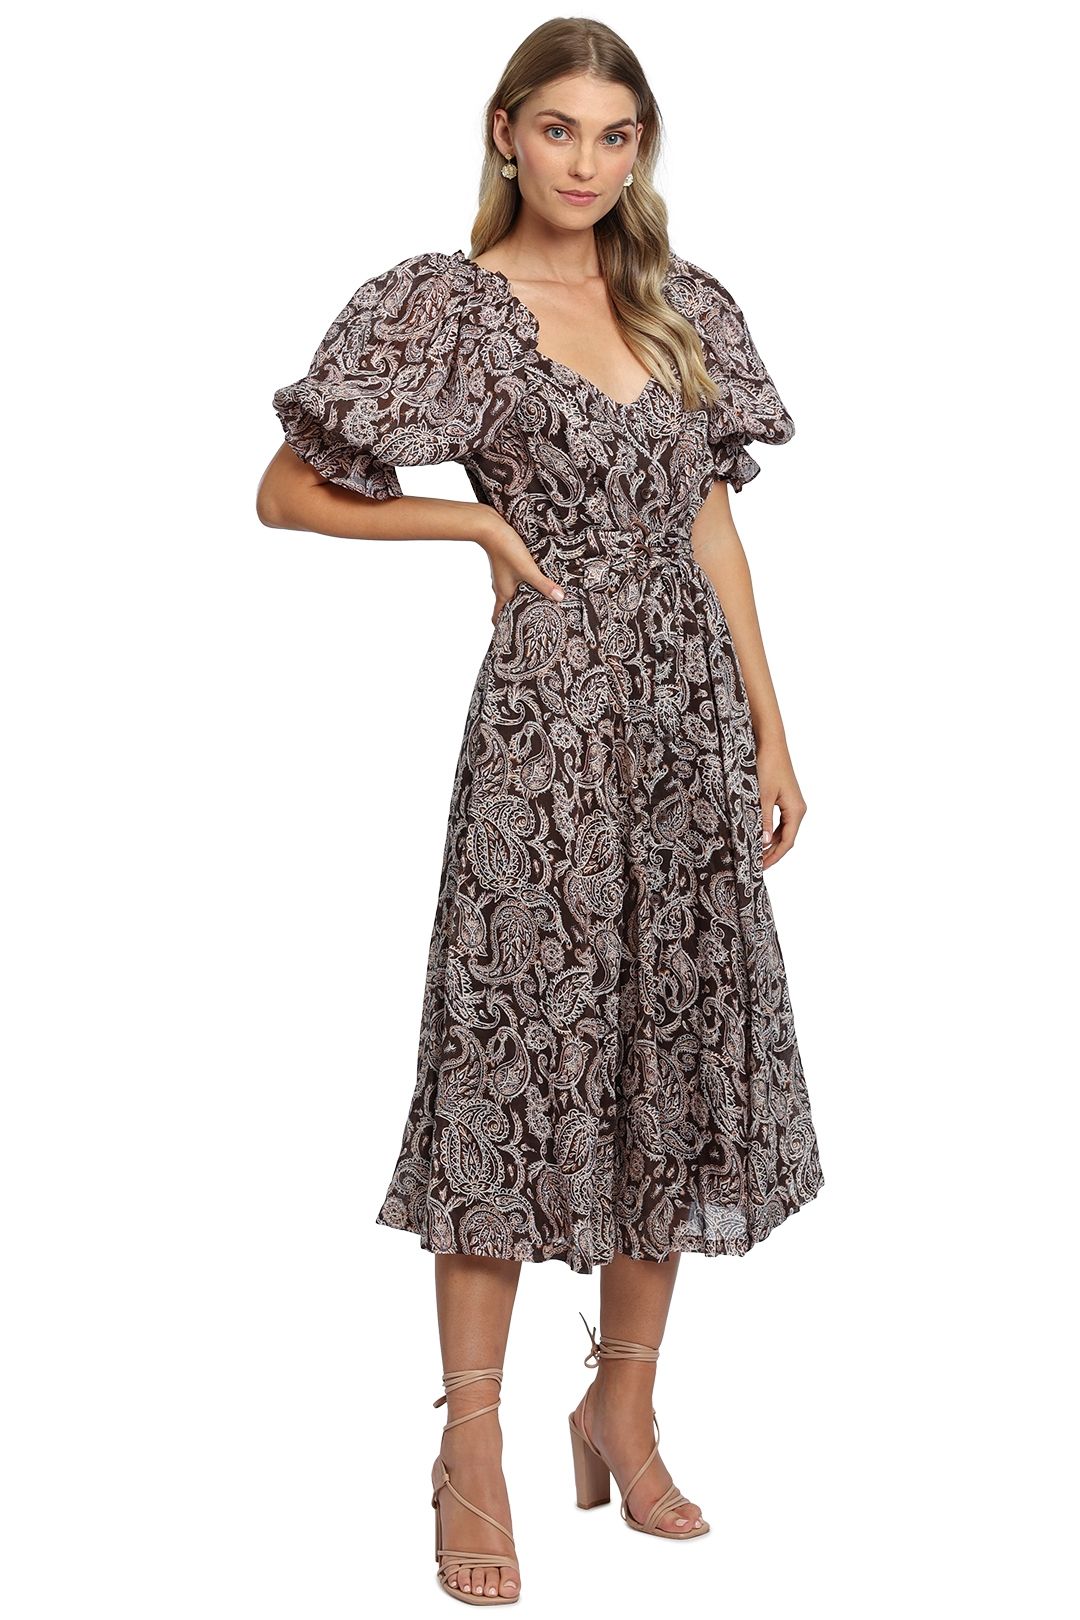 Ministry of Style Prairie Maxi Dress scoop print